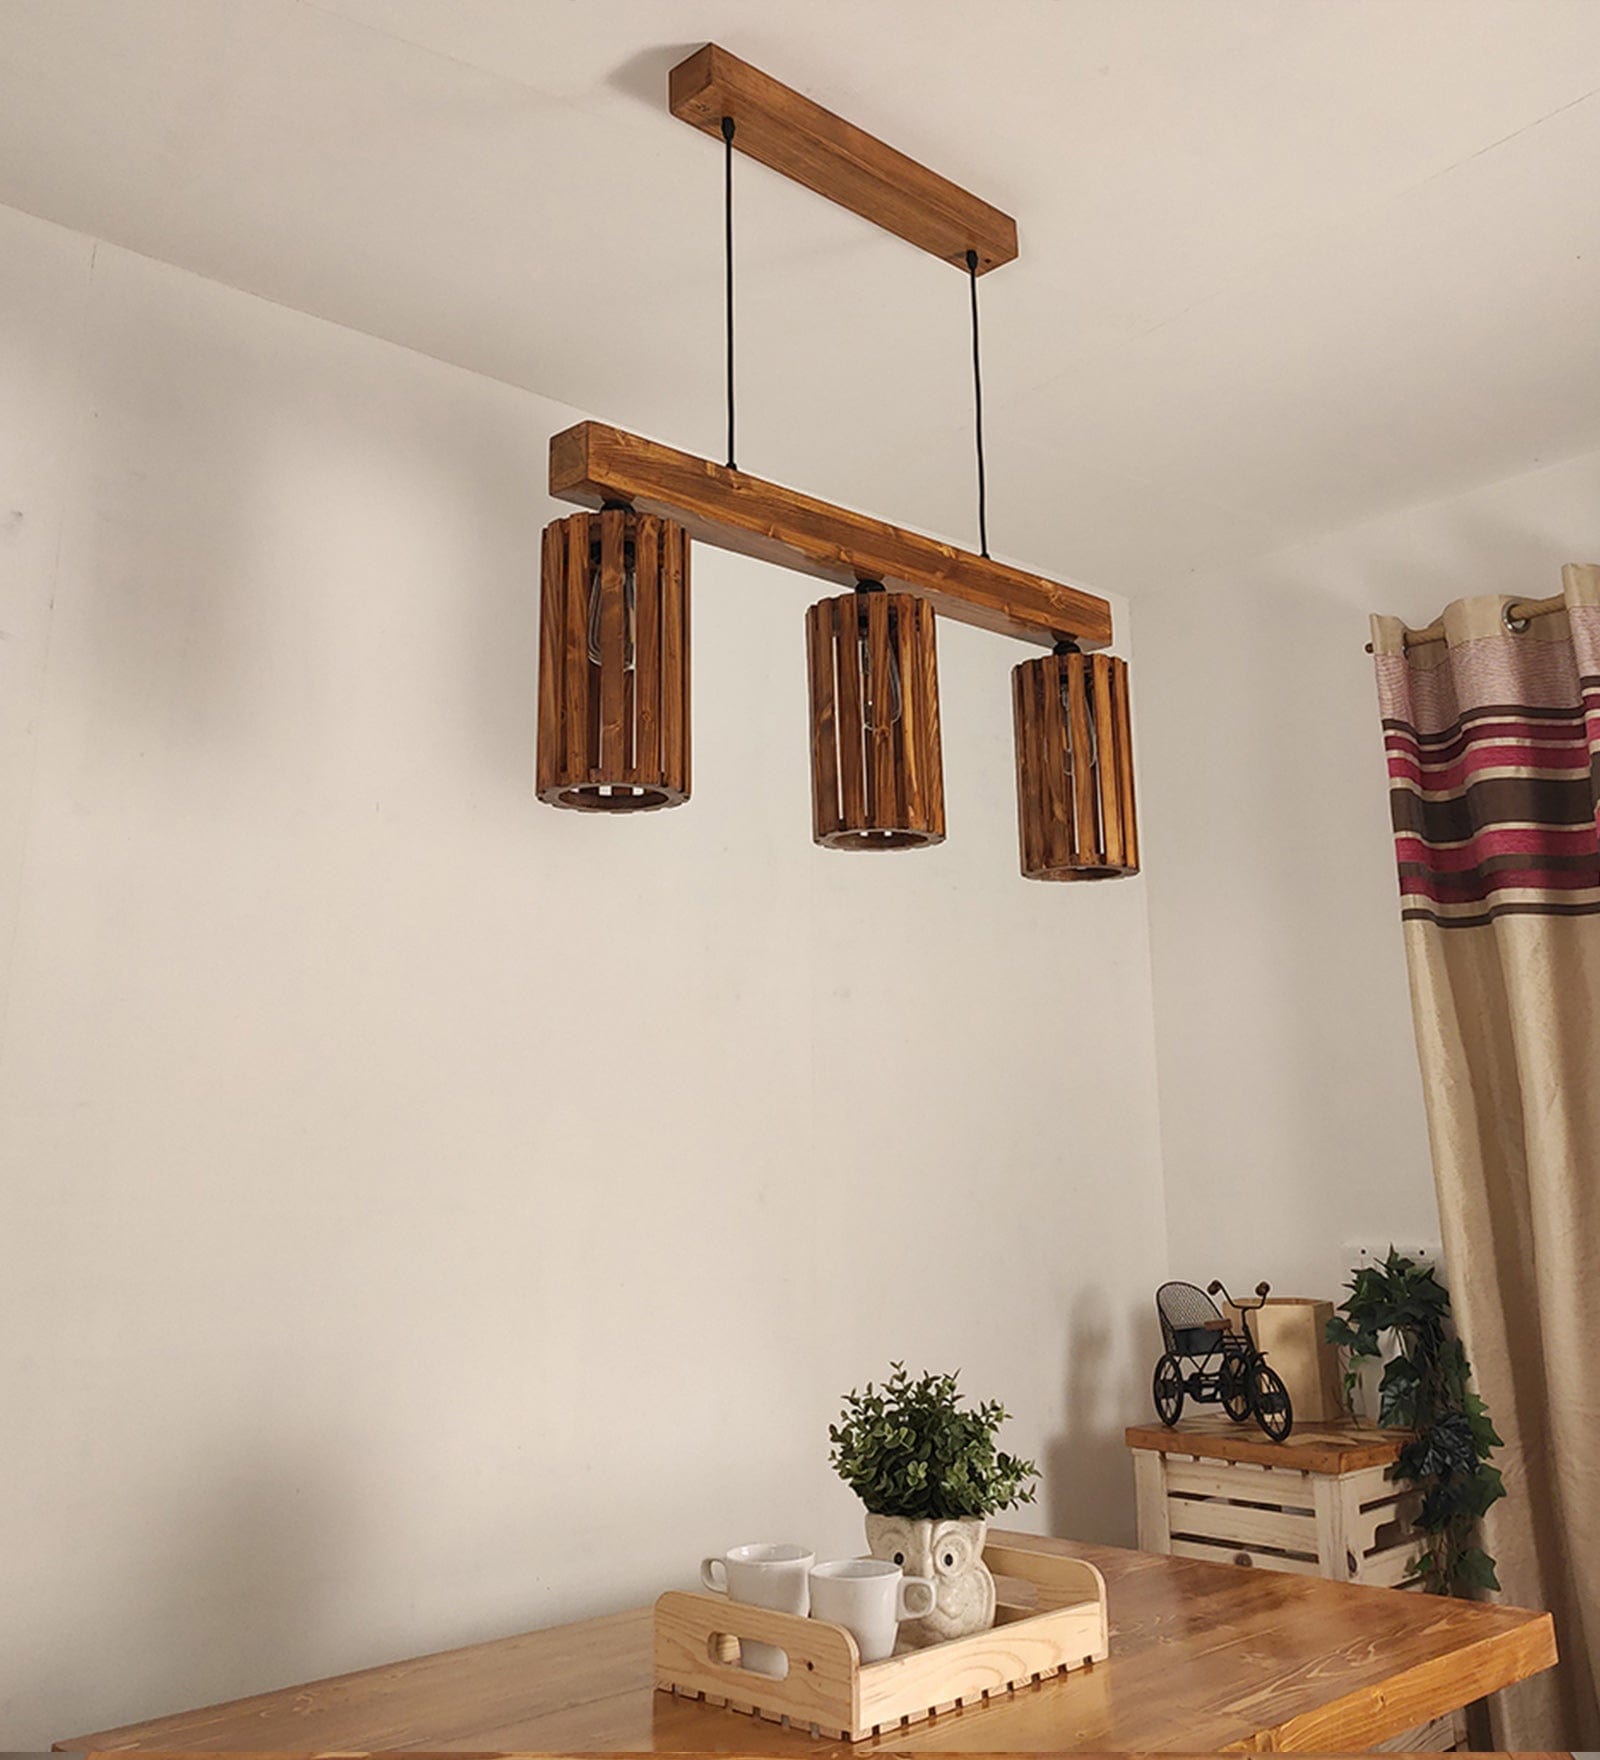 Casa Brown 3 Series Hanging Lamp (BULB NOT INCLUDED)